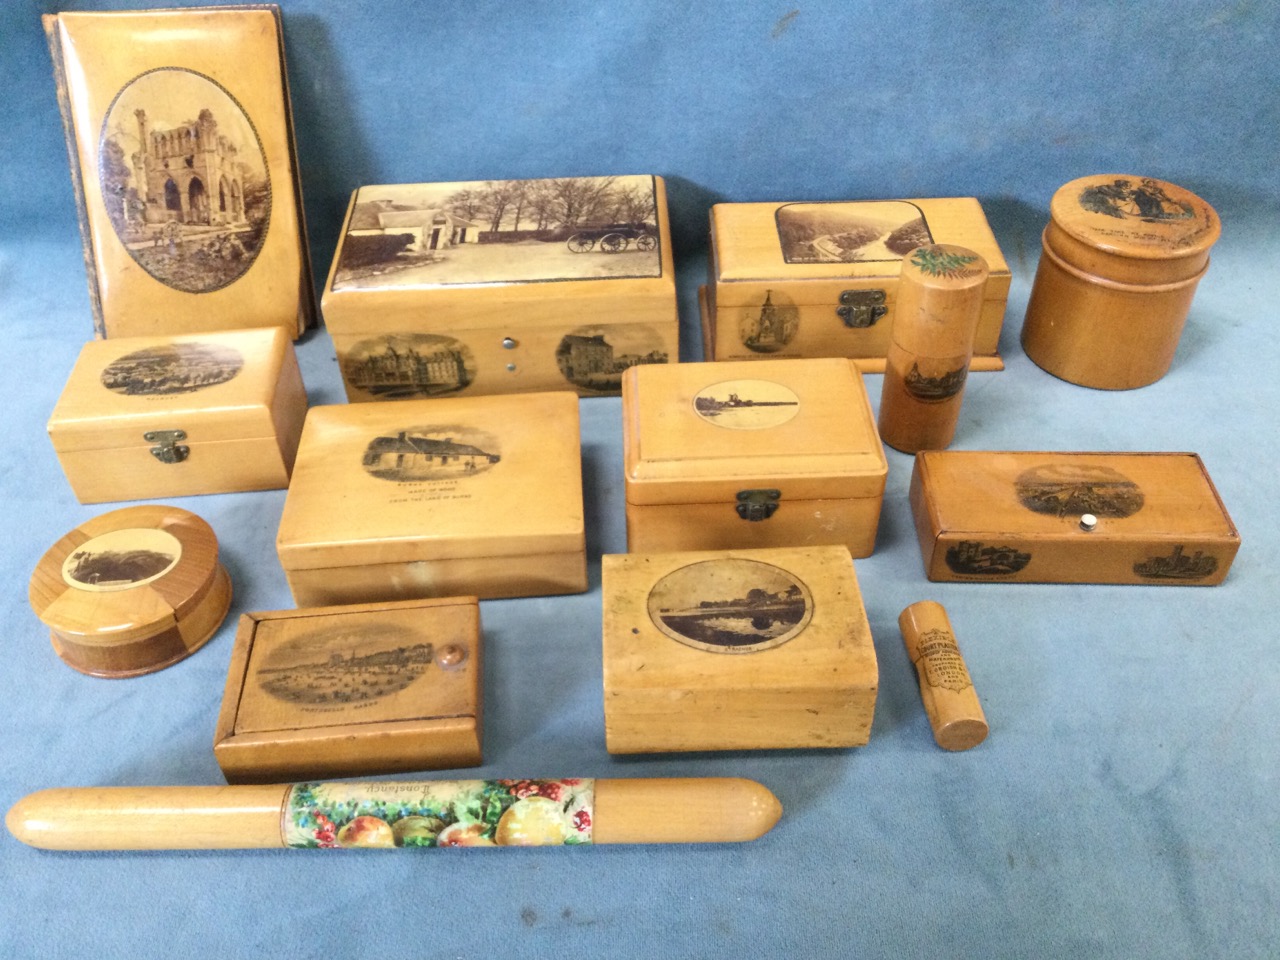 A Mauchline collection with boxes, pots, tubular containers, and Walter Scott book - Strachur,